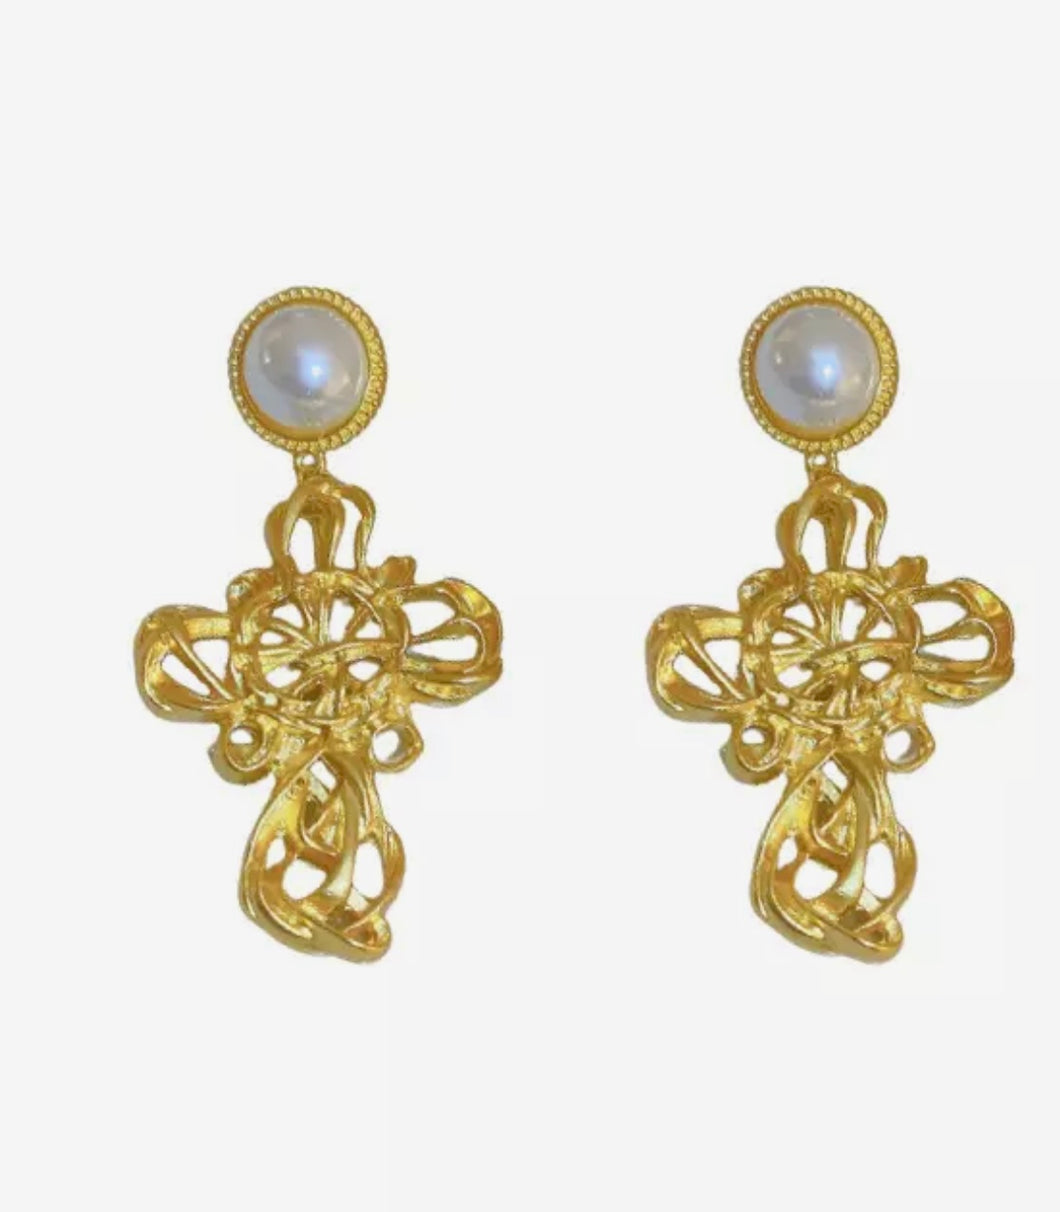 Gold and Pearl Baroque Style Cross Earrings